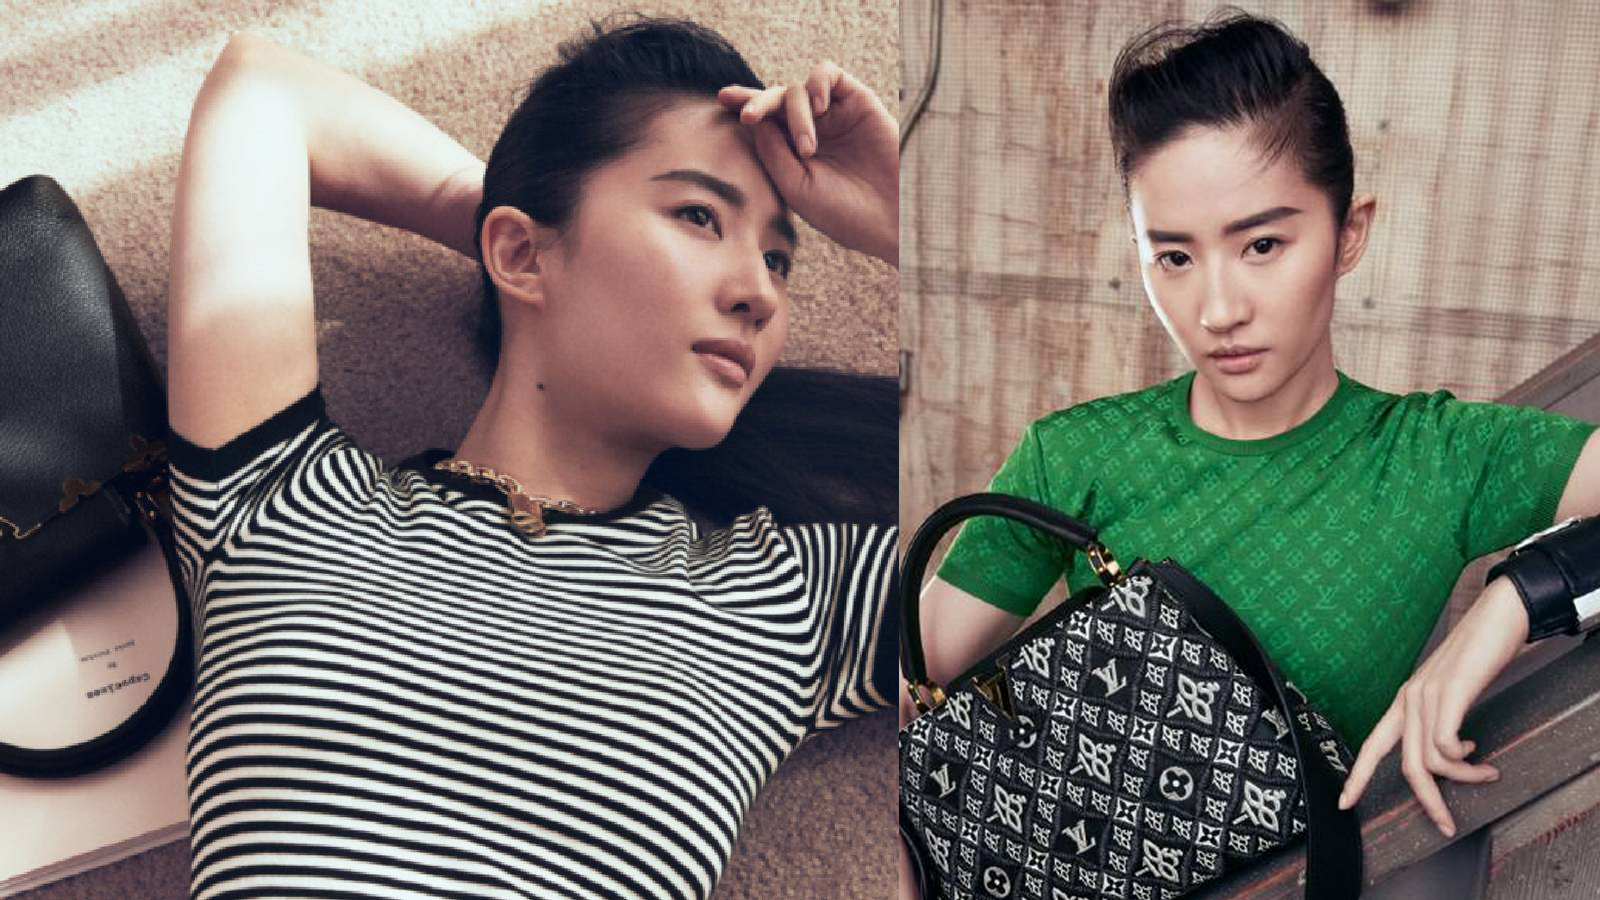 China's Next Big Thing? Who Is Louis Vuitton's Latest Ambassador